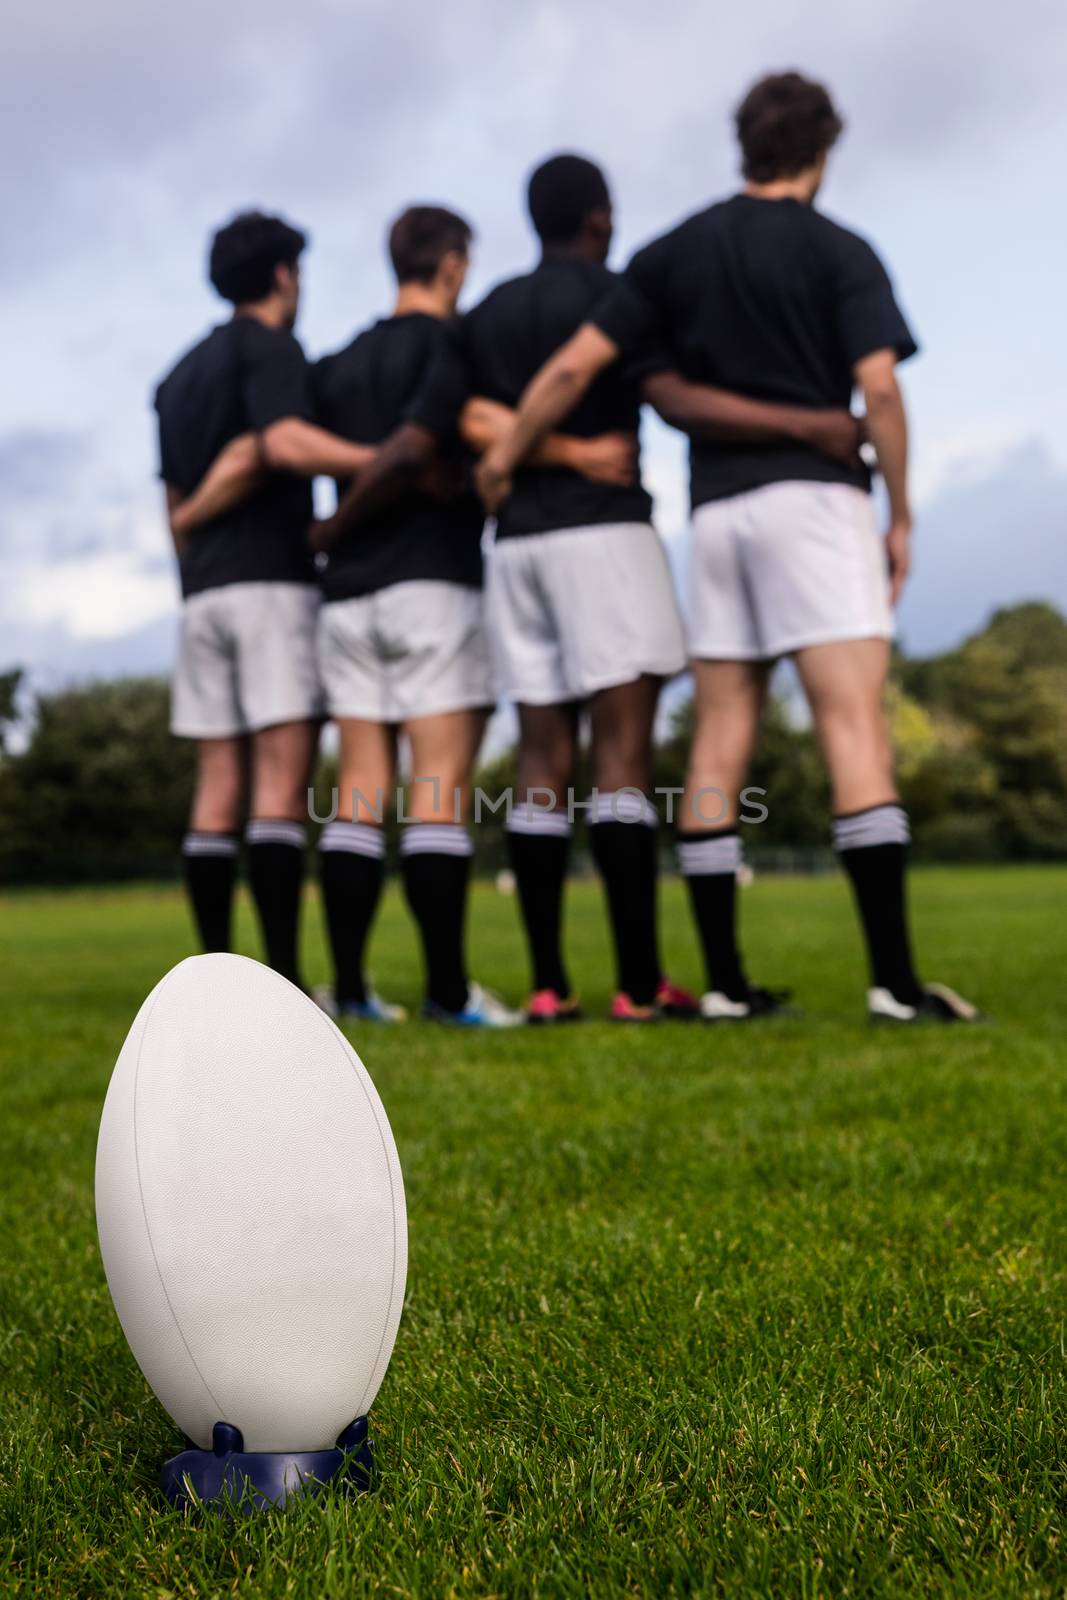 Rugby players standing together before match at the park